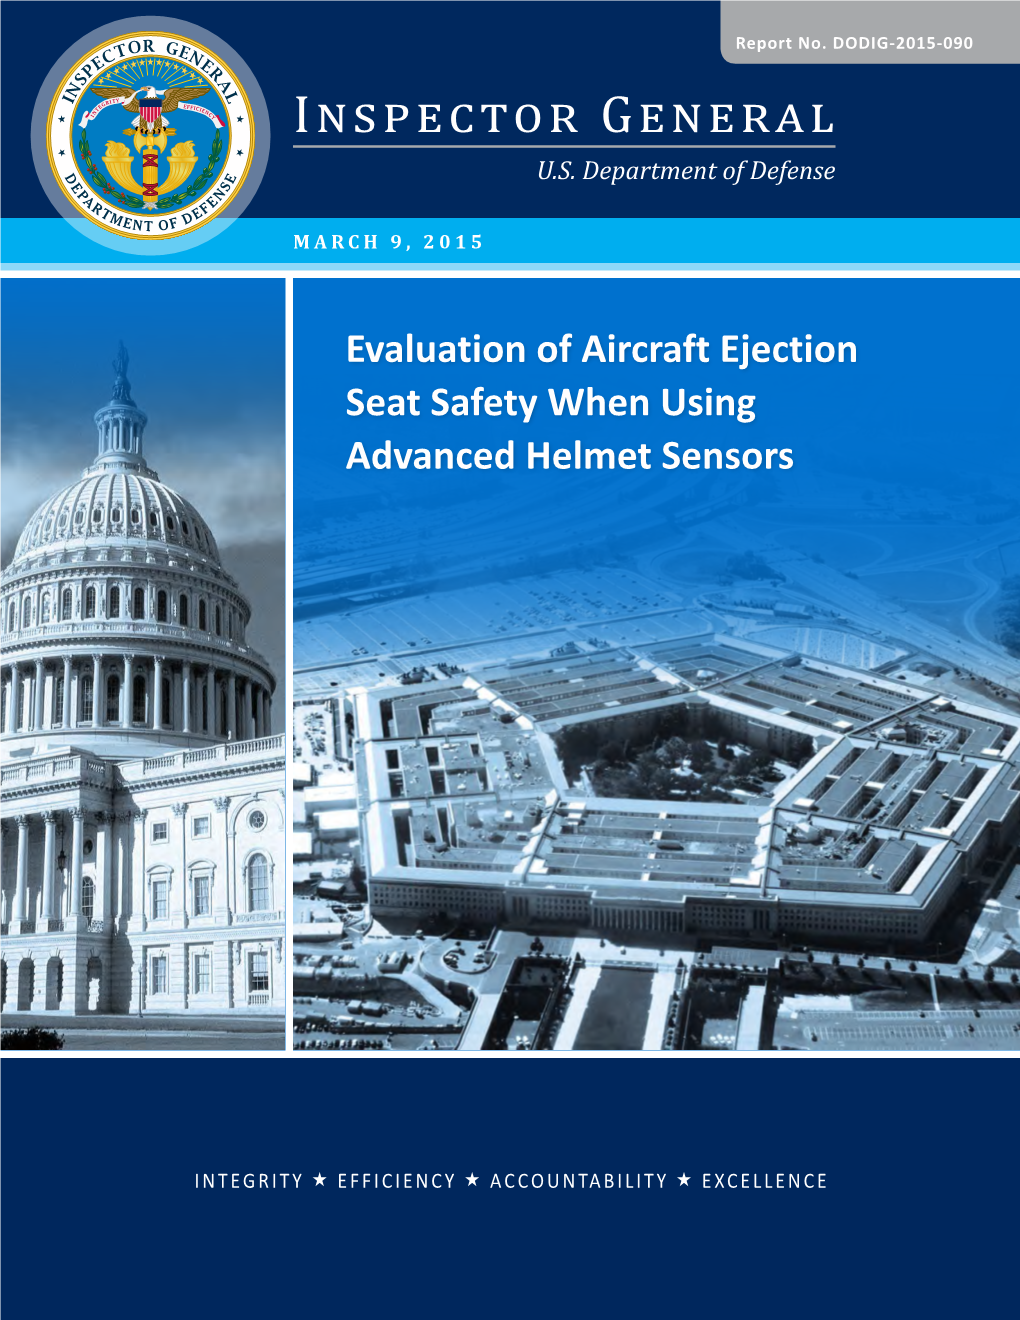 Evaluation of Aircraft Ejection Seat Safety When Using Advanced Helmet Sensors